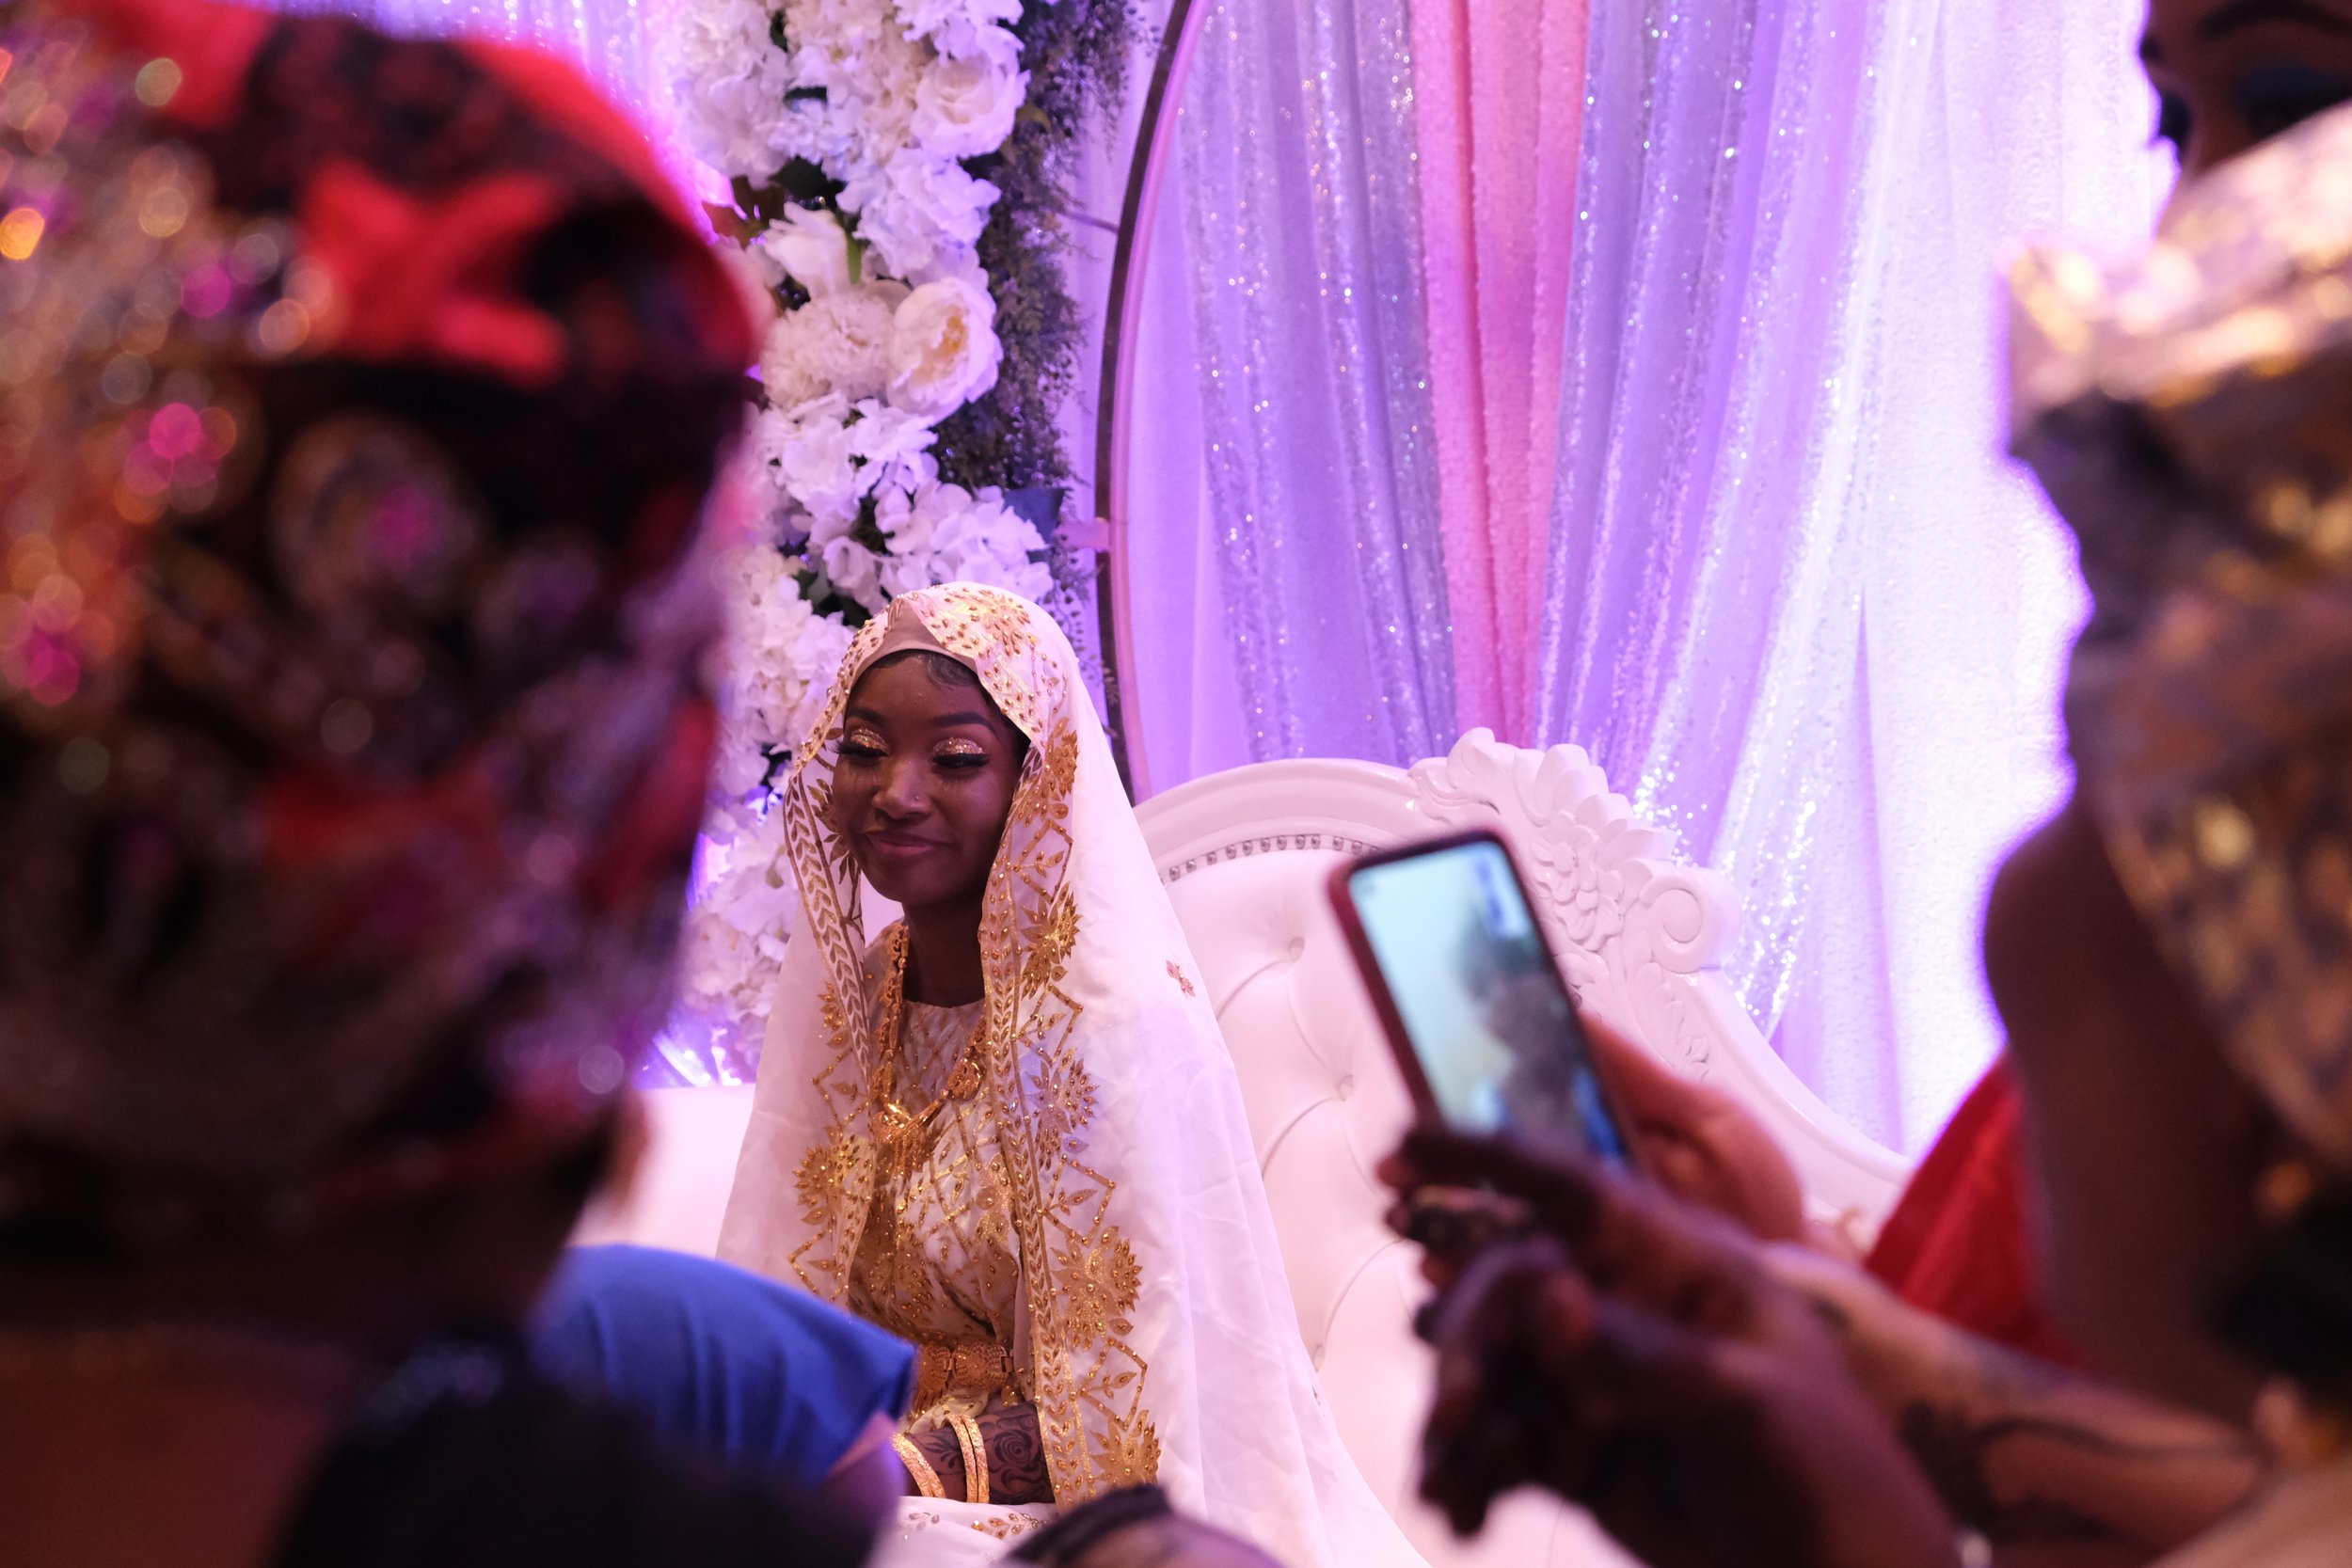  Famo Musa sits on the stage at her wedding while relatives take her photo on December 24, 2021. Musa, a Somalian refugee, challenged the narrative commonly set for women within her community by leaving her first arranged marriage and studying at UC 